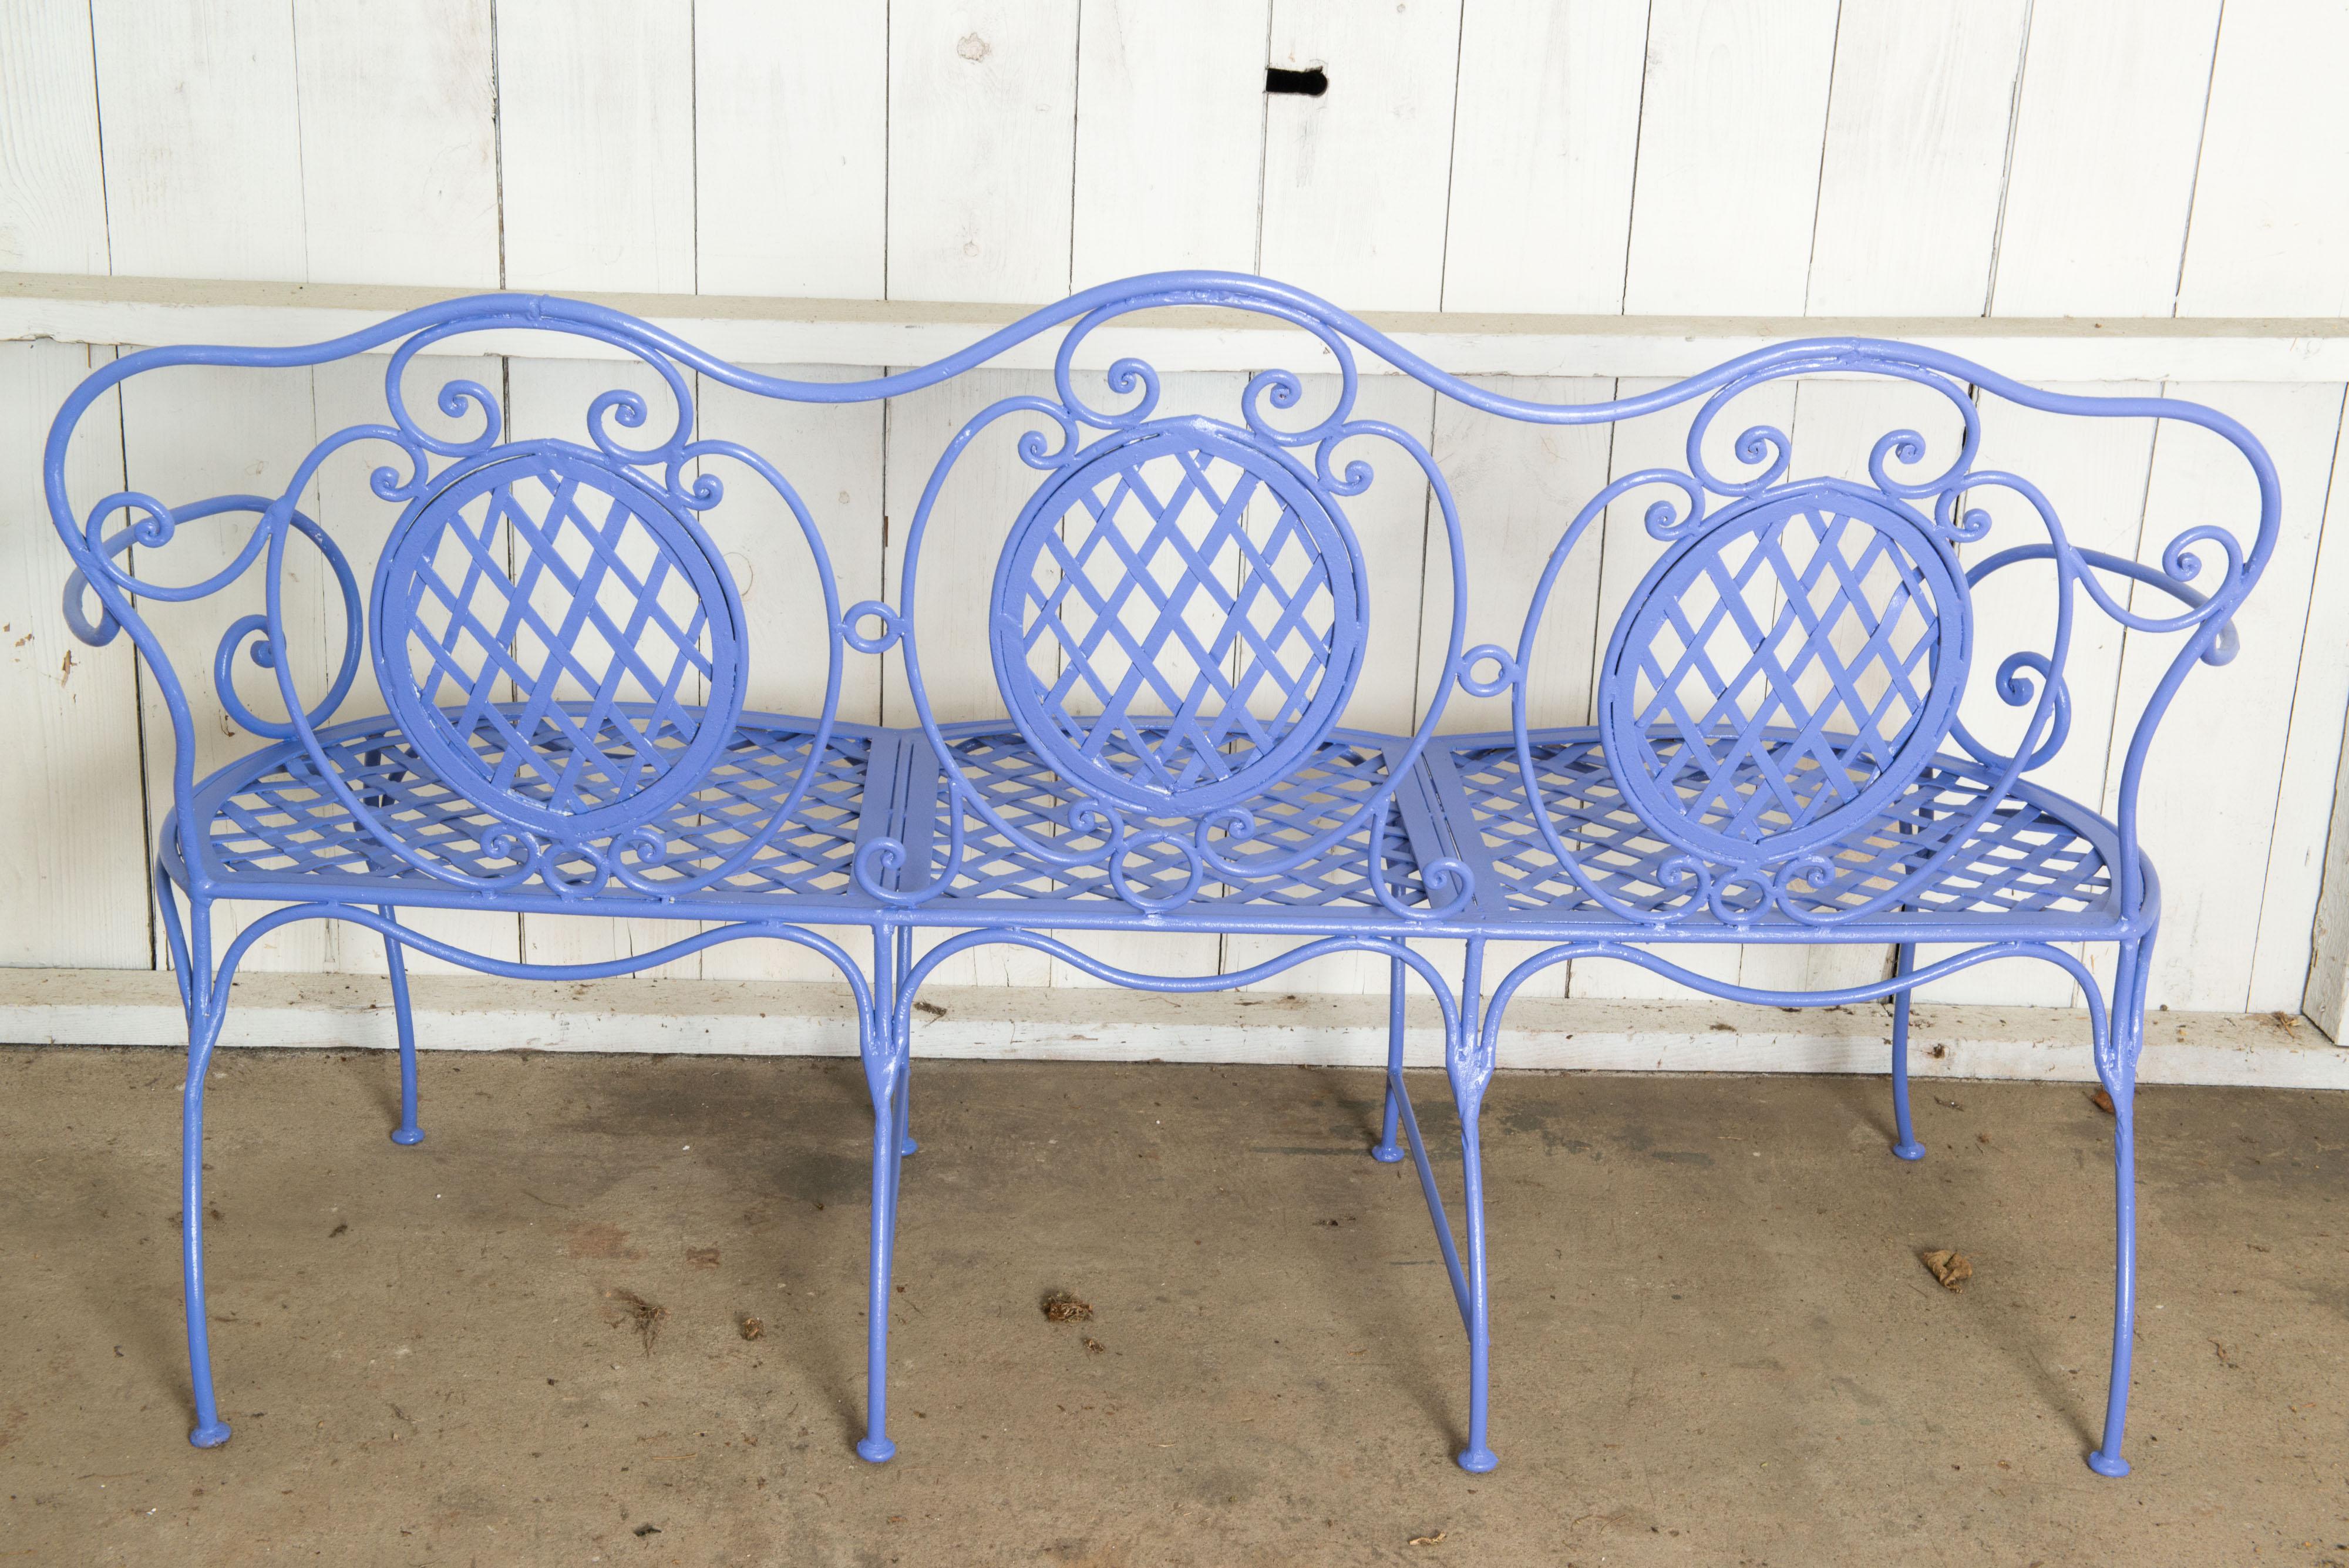 Wrought Iron Garden Bench, Periwinkle For Sale 5